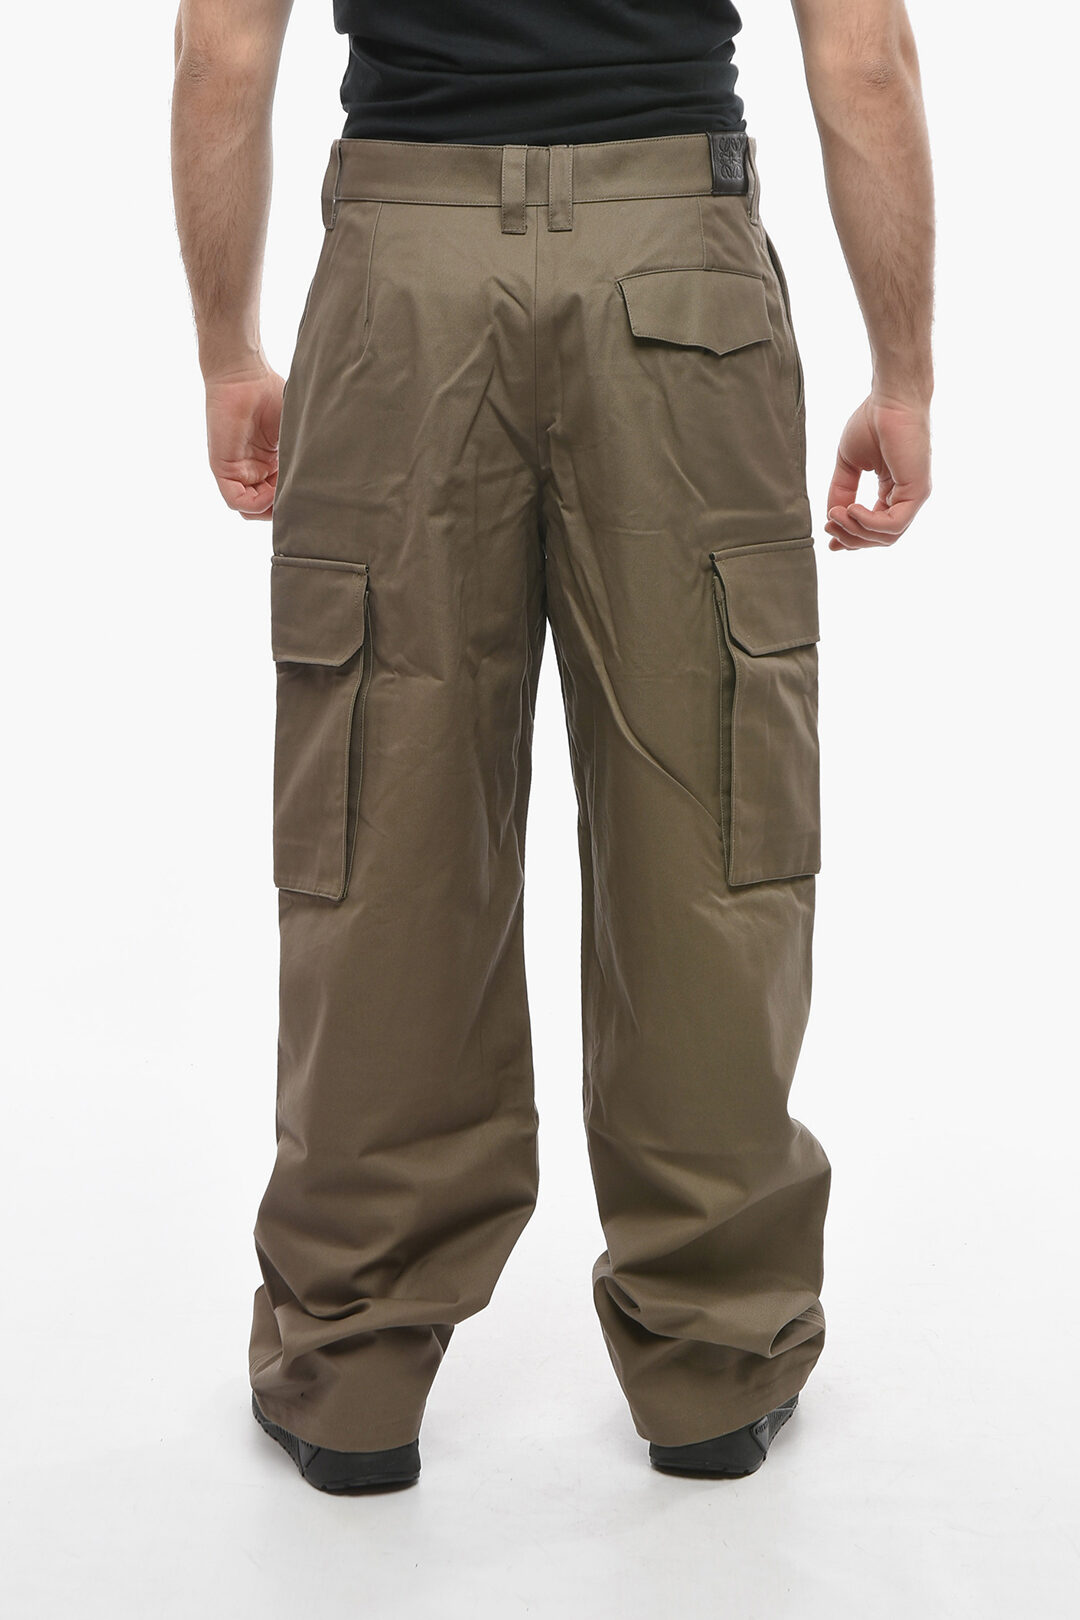 Qucoqpe Men's Relaxed Straight-Fit Cargo Pant,Wild Cargo India | Ubuy